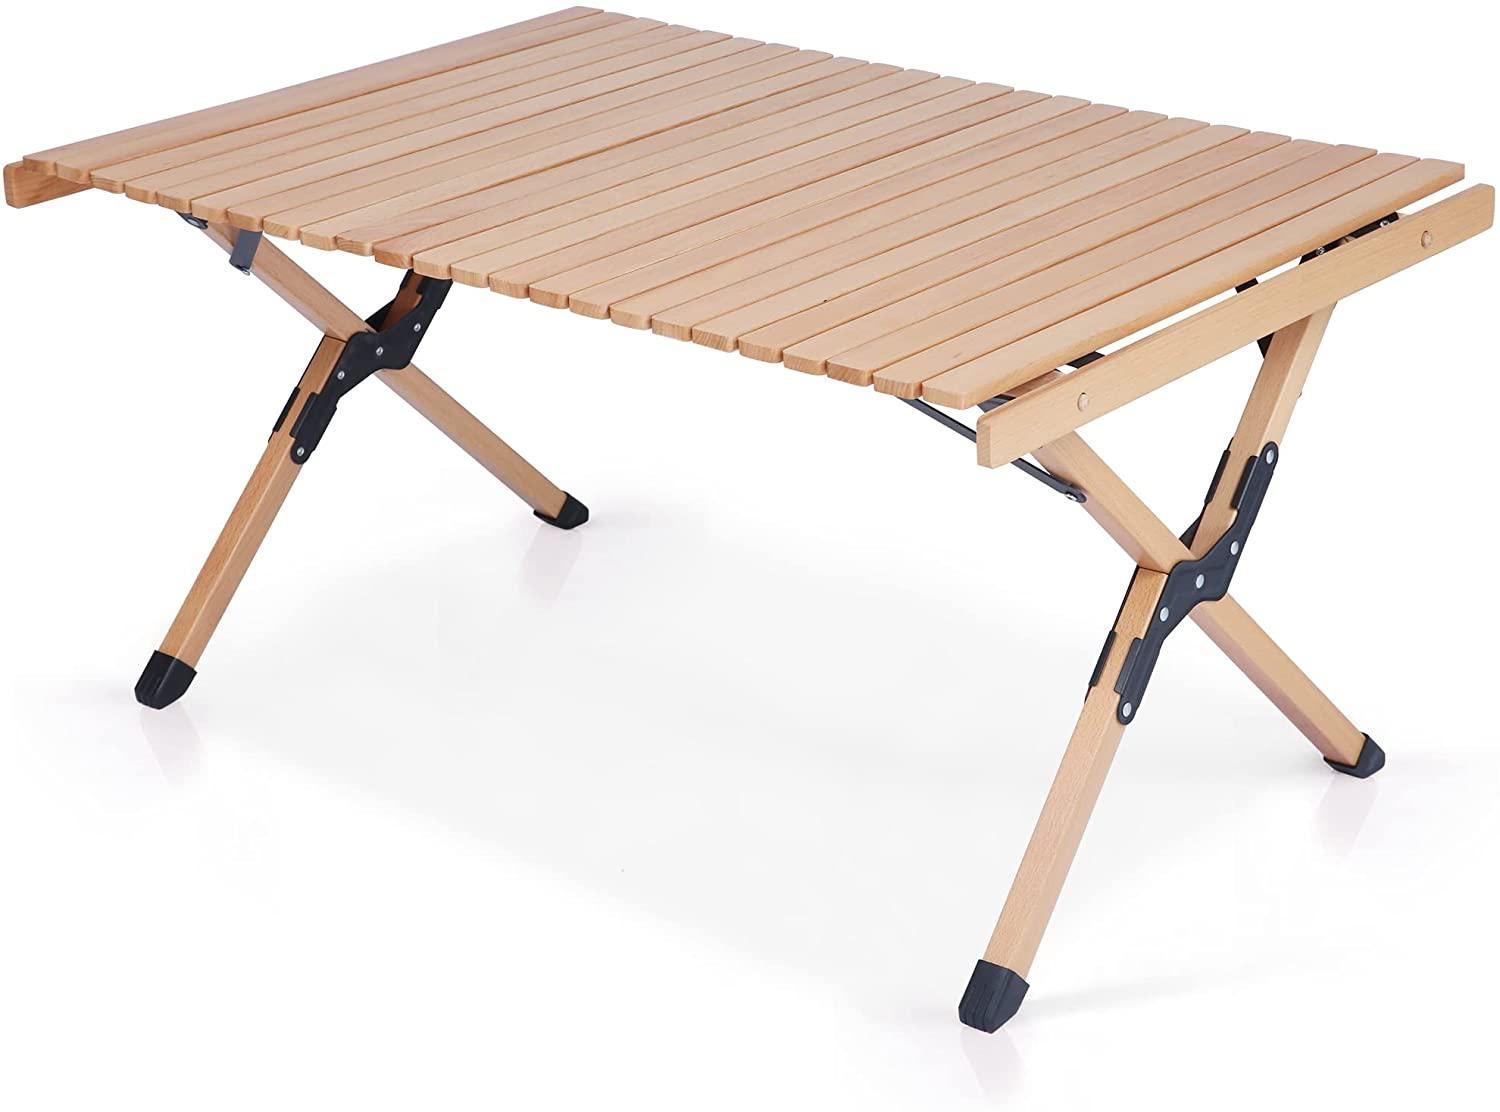 Folding Camping Roll Up Wooden Table Foldable Indoor Outdoor Low Height Portable Picnic Table - Bosonshop